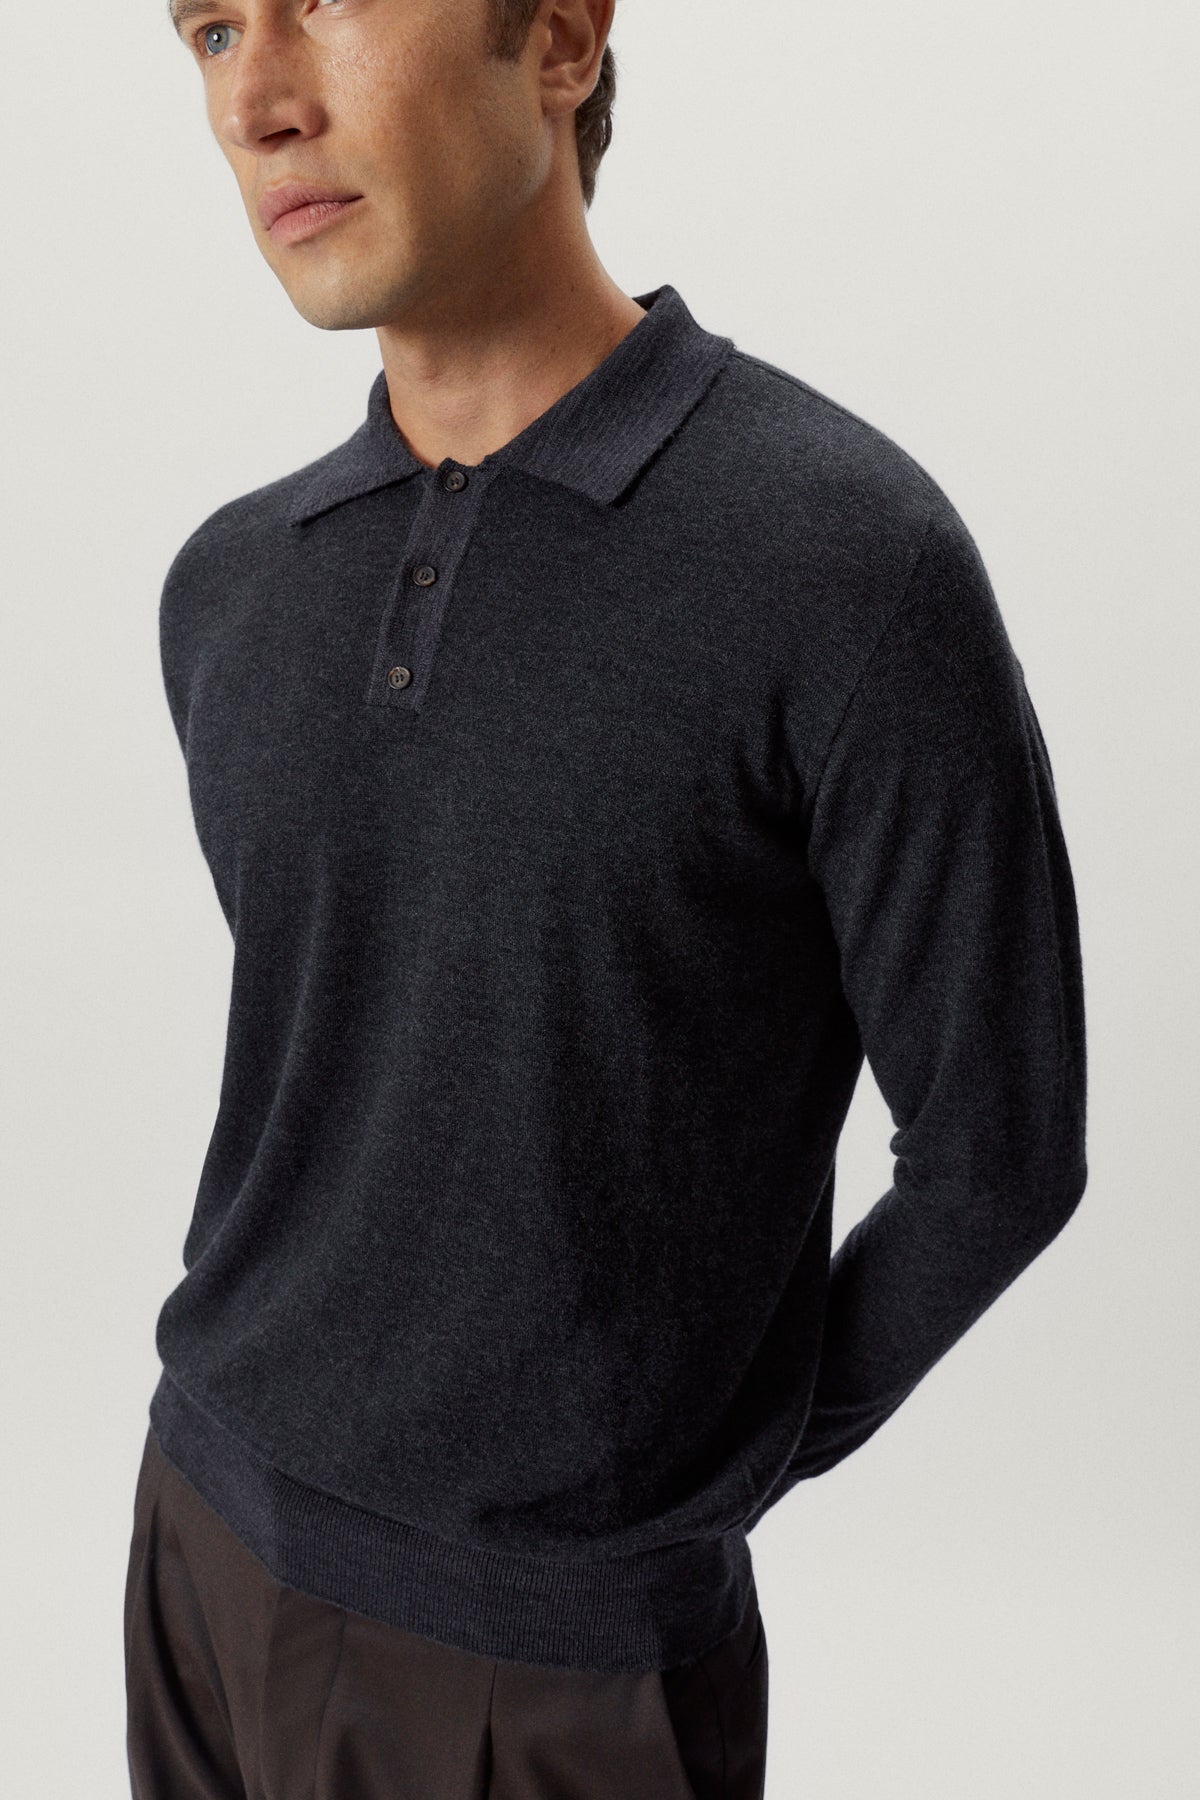 the ultrasoft wool polo anthracite melange